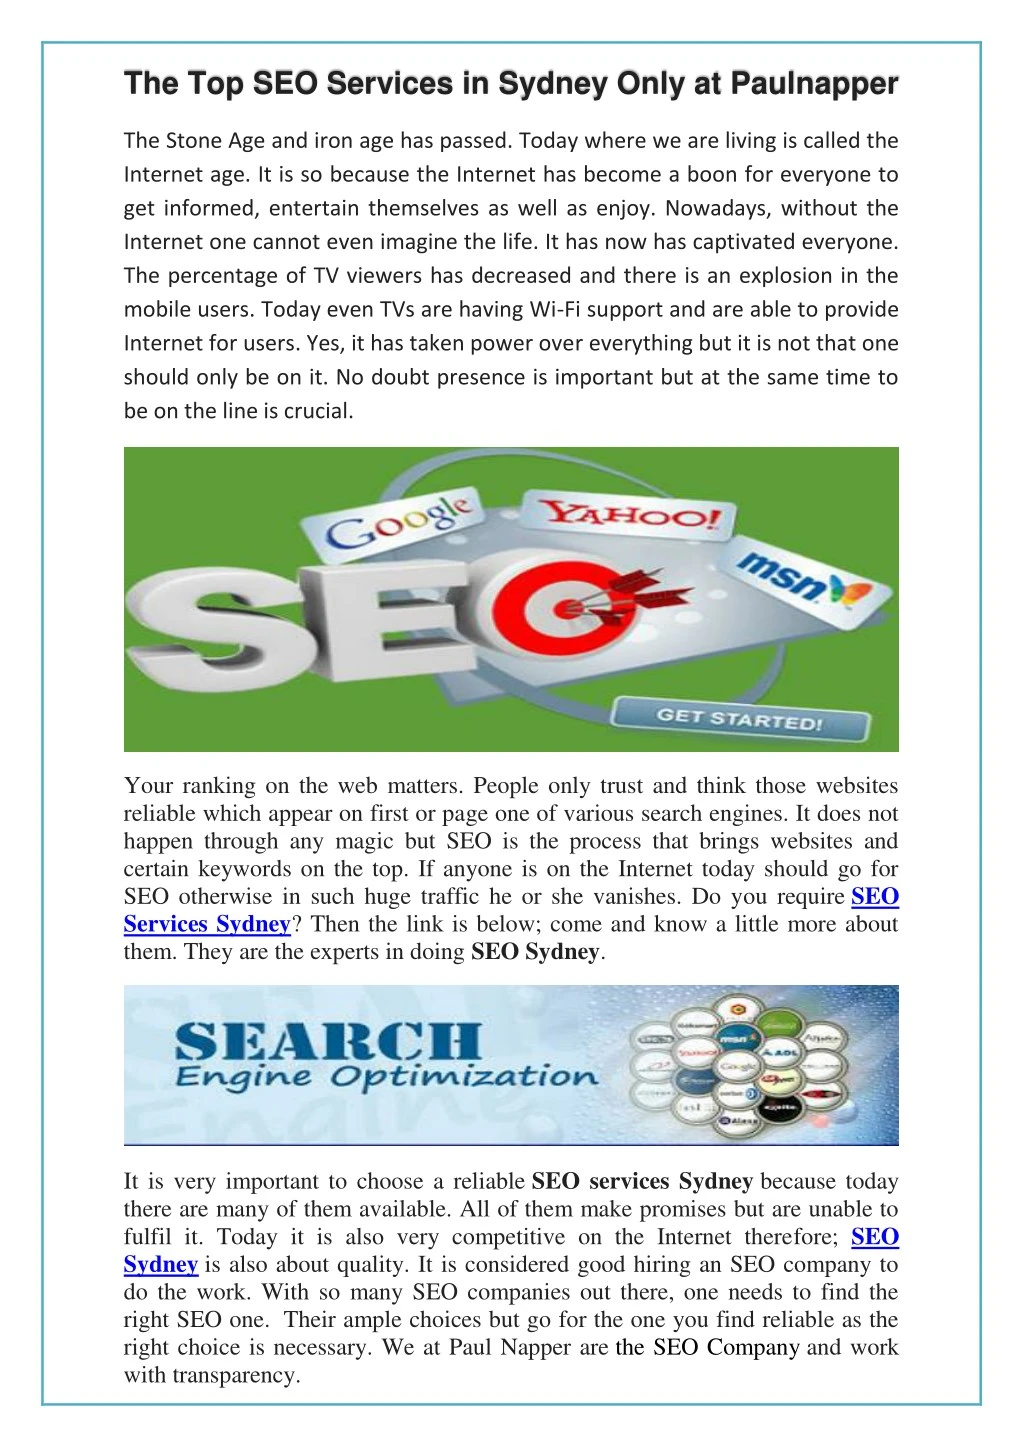 the top seo services in sydney only at paulnapper